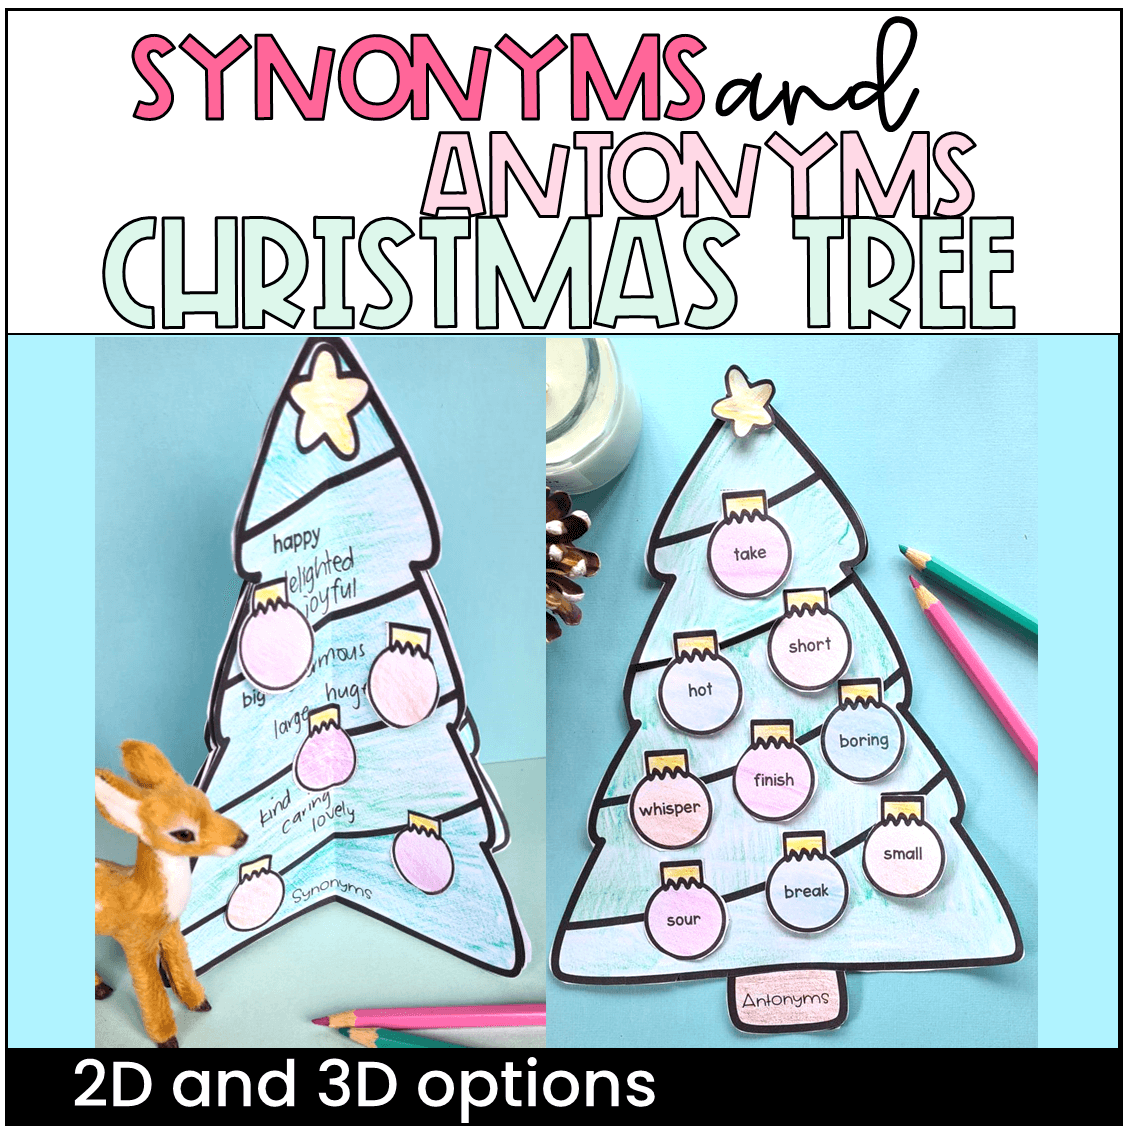 Christmas Tree Synonyms And Antonyms Craft Grammar Activity